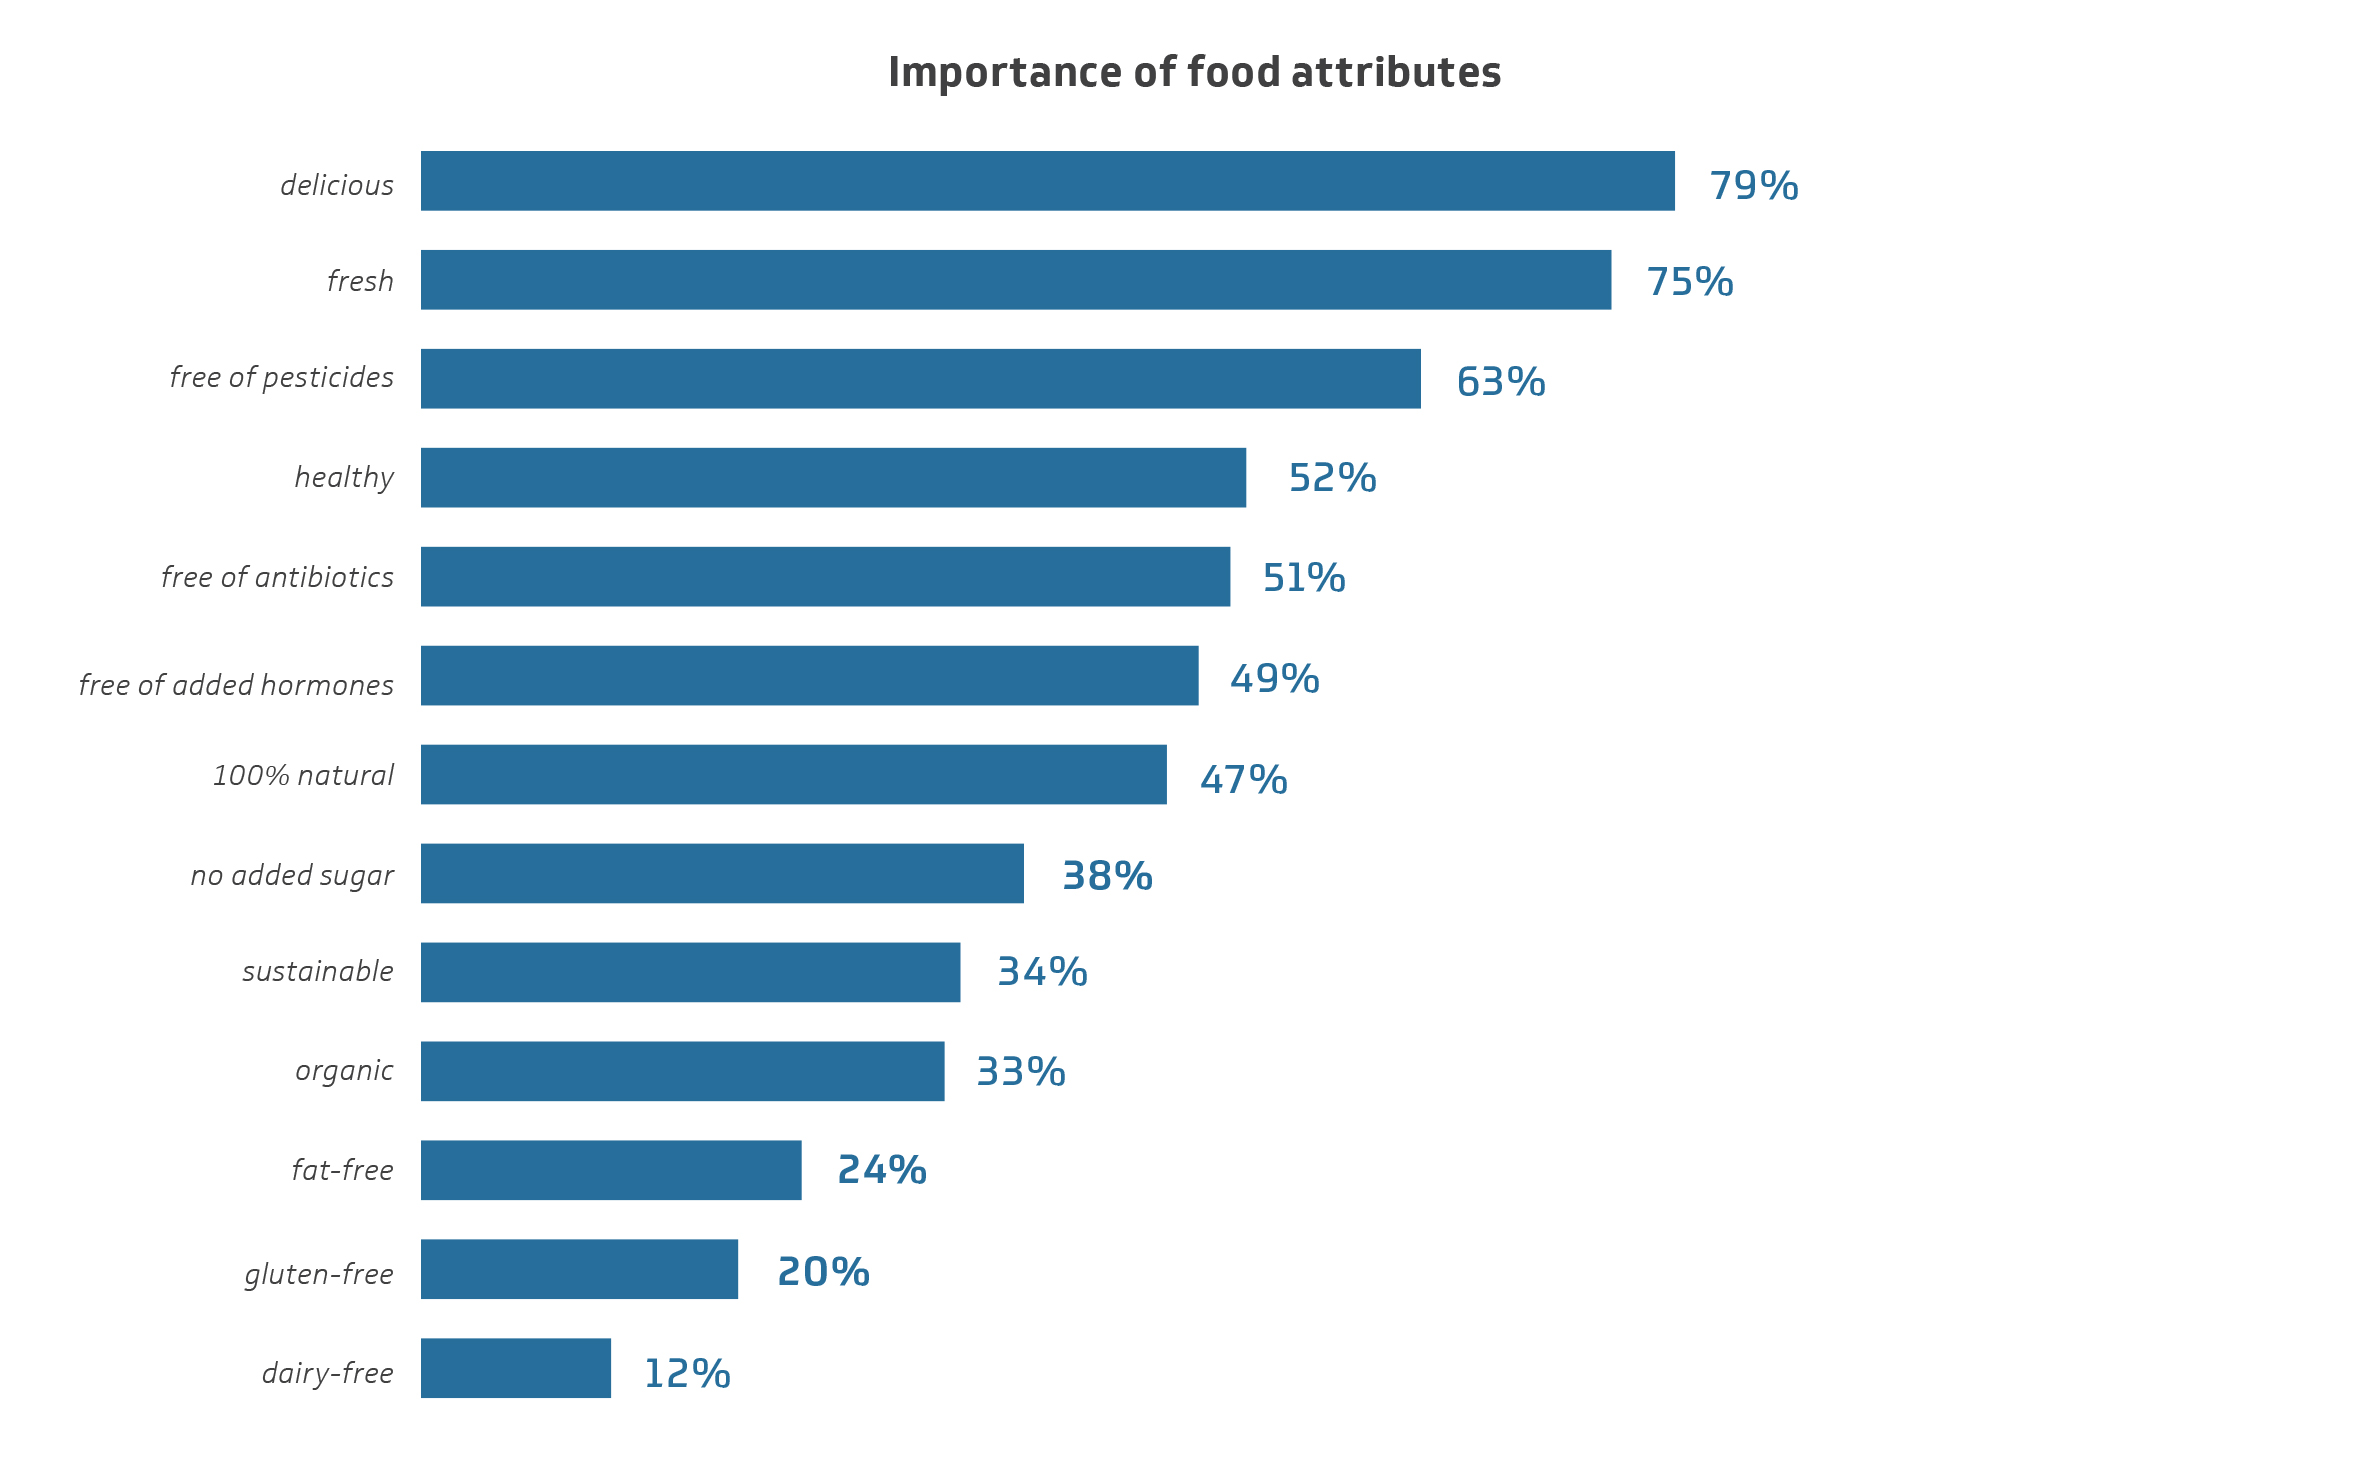 Chart 4 - Importance of Food Attributes